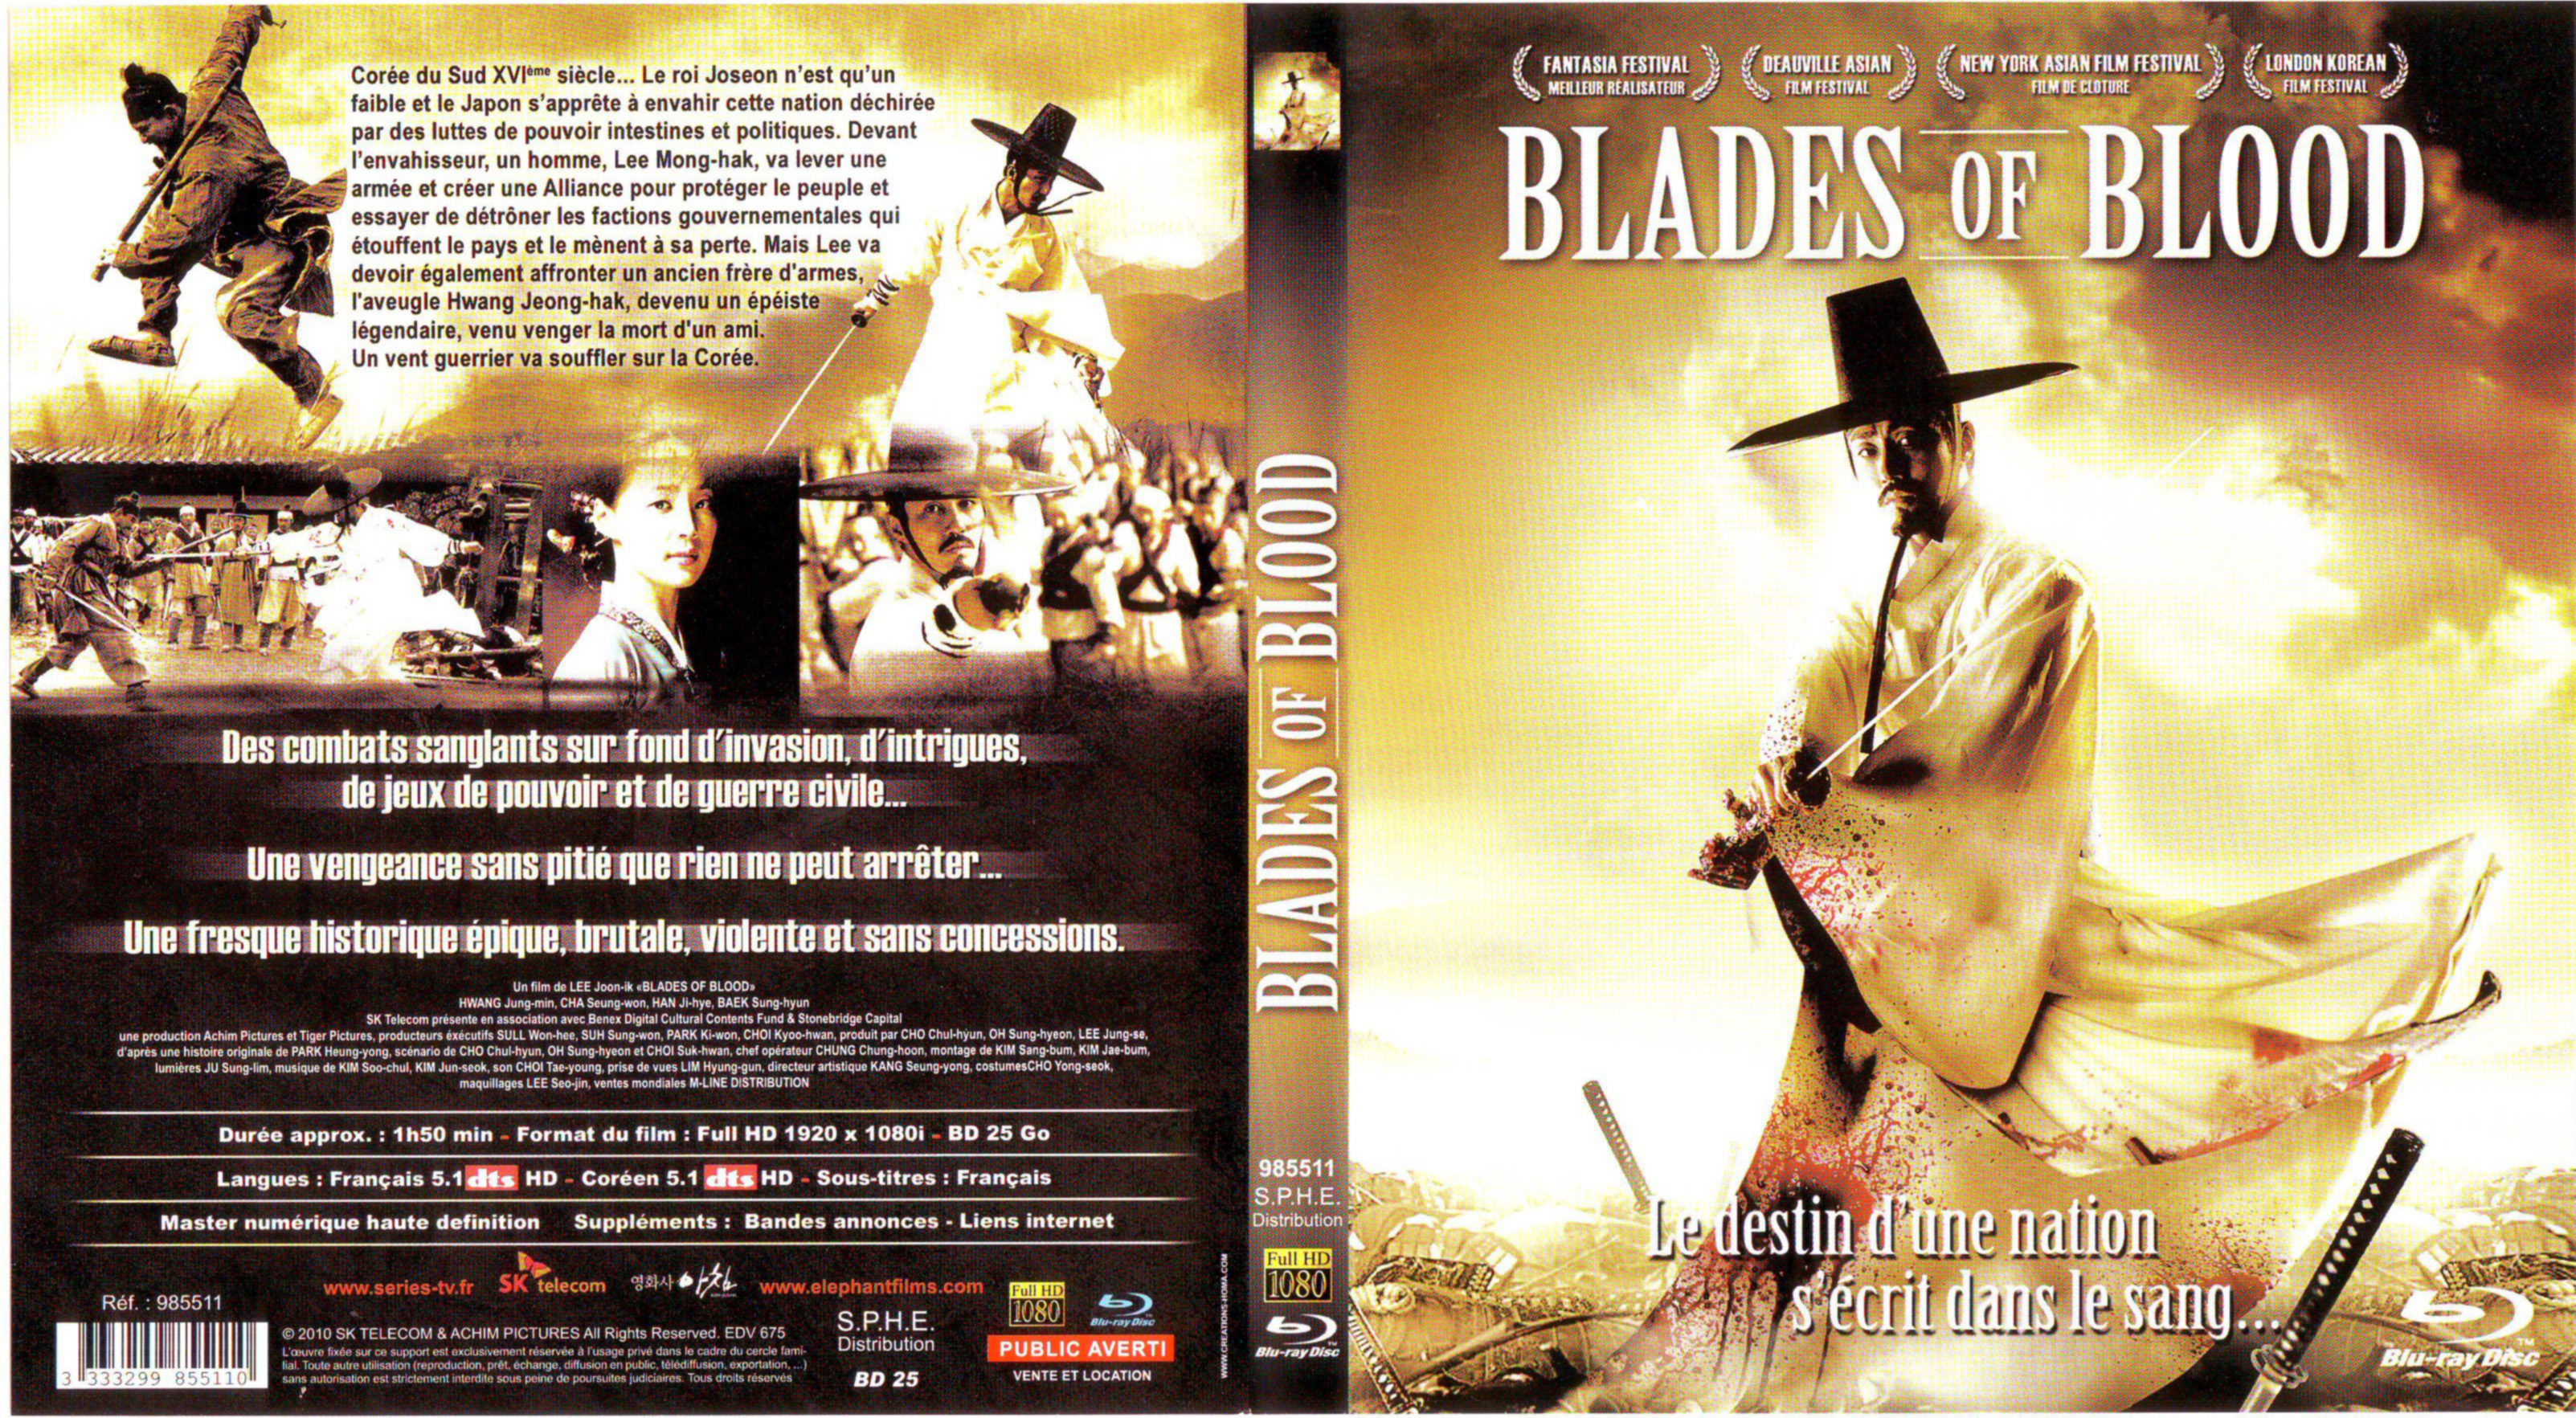 Jaquette DVD Blades of blood (BLU-RAY)